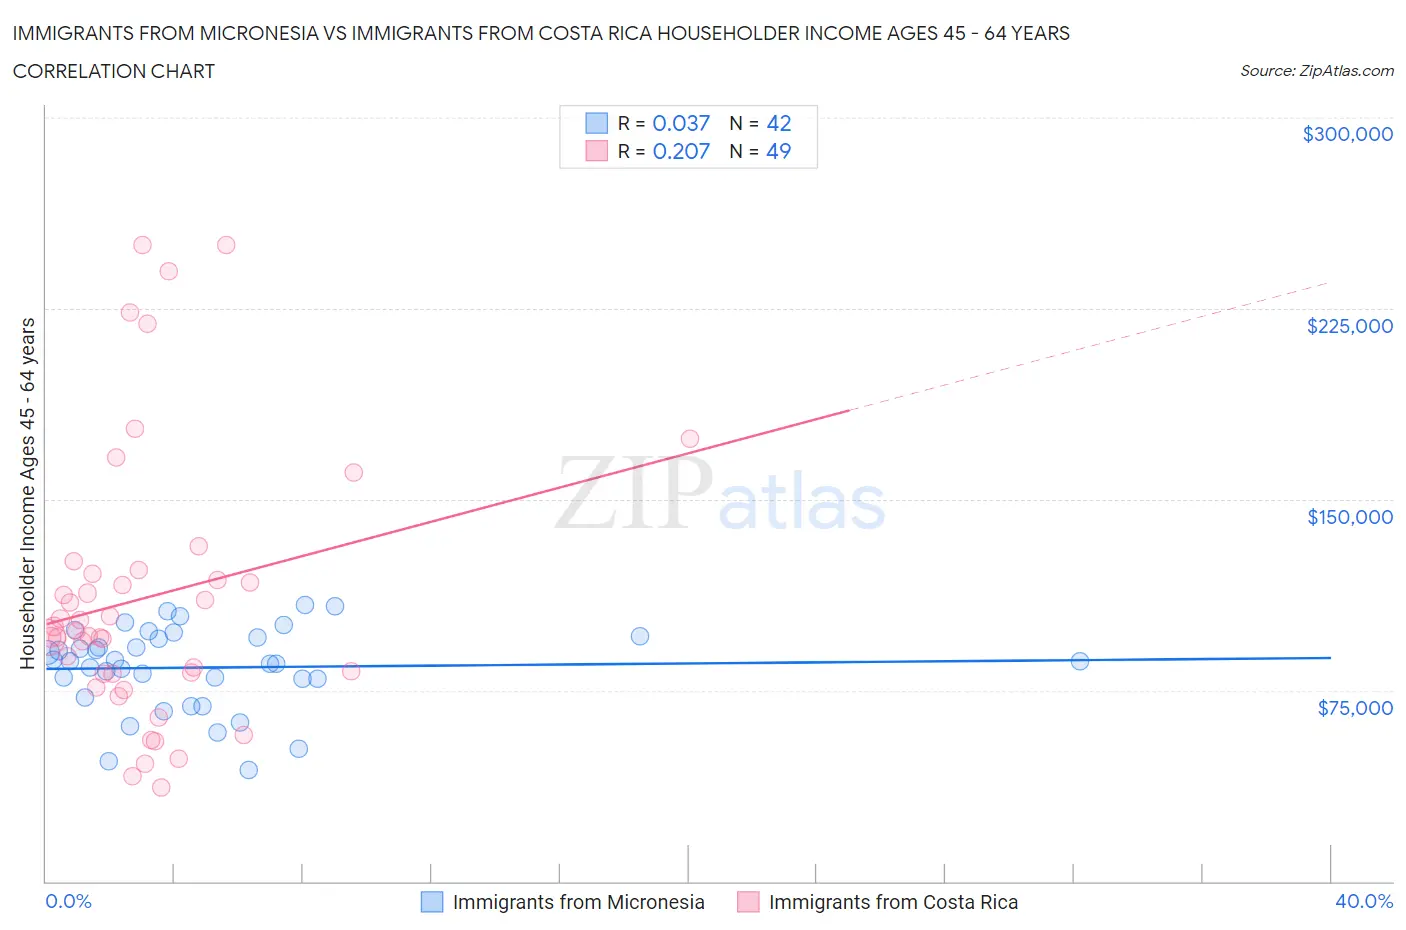 Immigrants from Micronesia vs Immigrants from Costa Rica Householder Income Ages 45 - 64 years